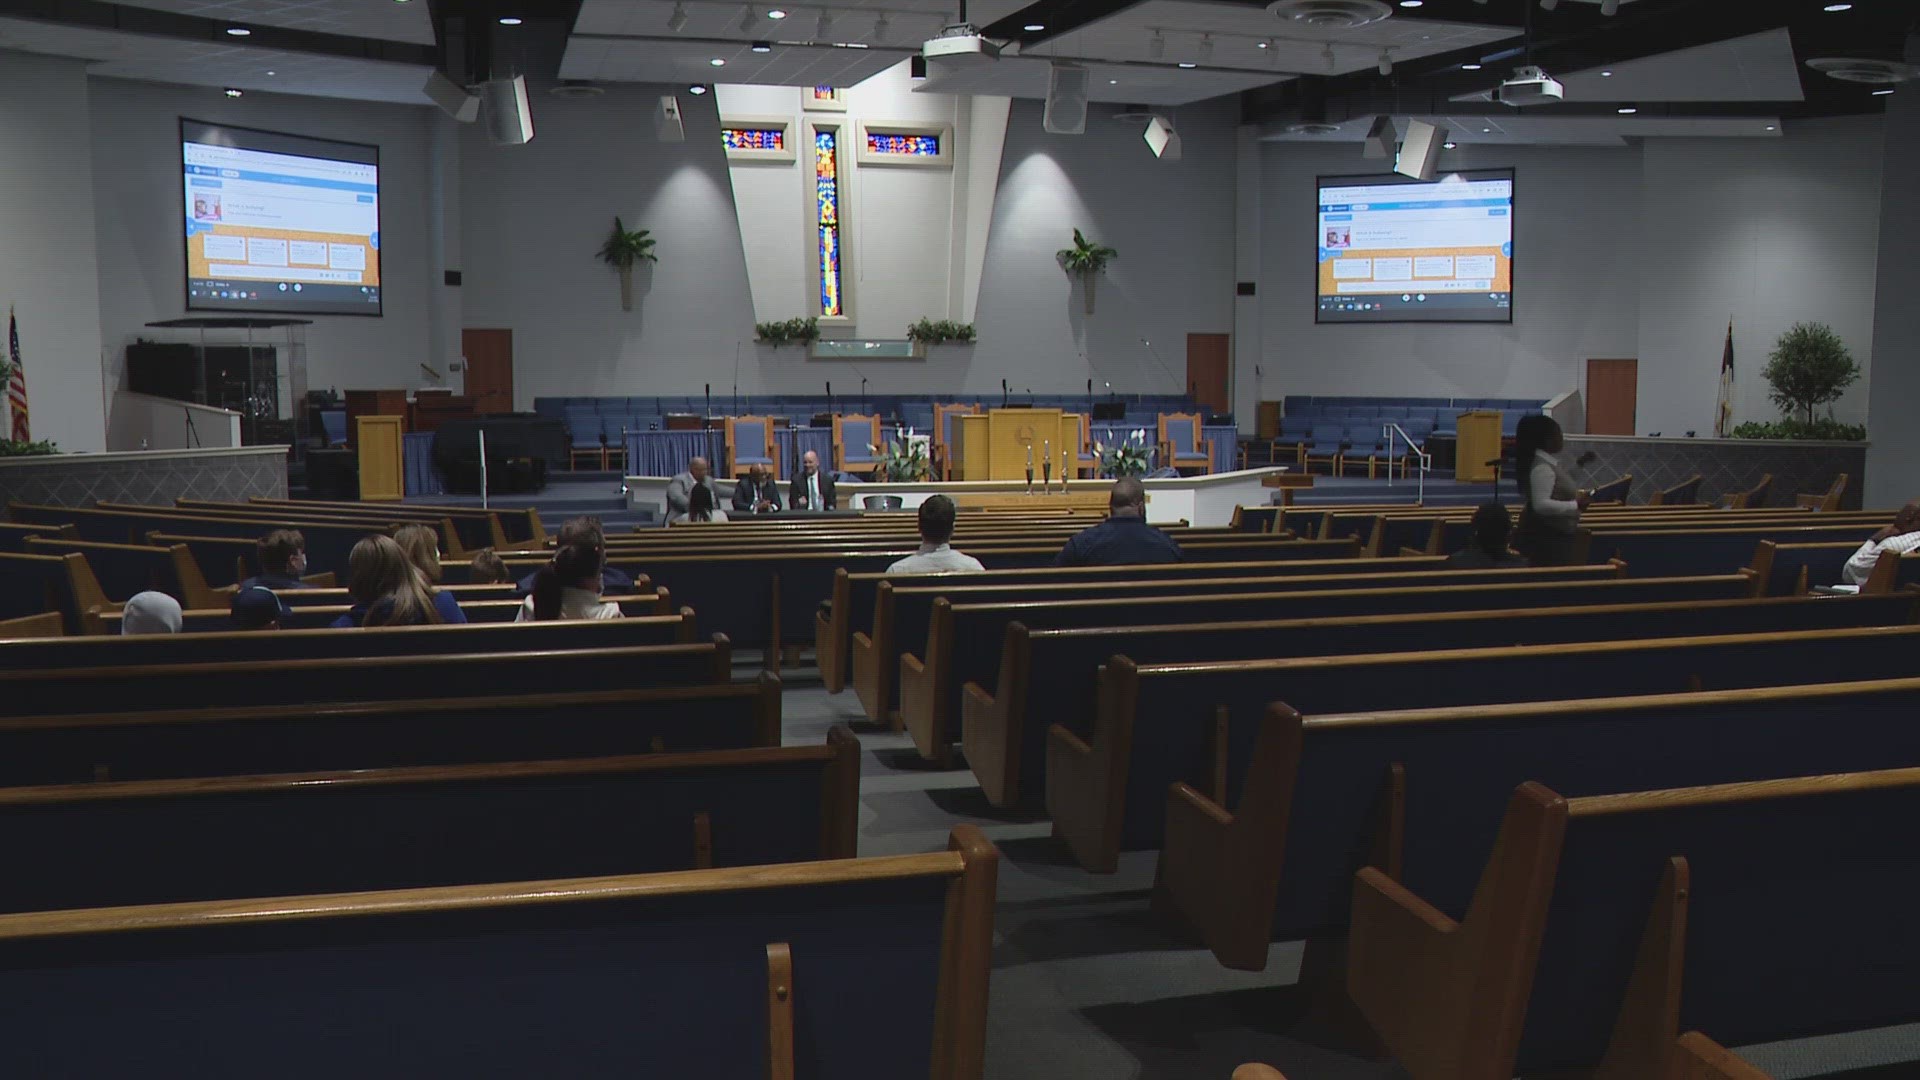 Two clergy groups came together Tuesday to host a discussion about problems plaguing the community.